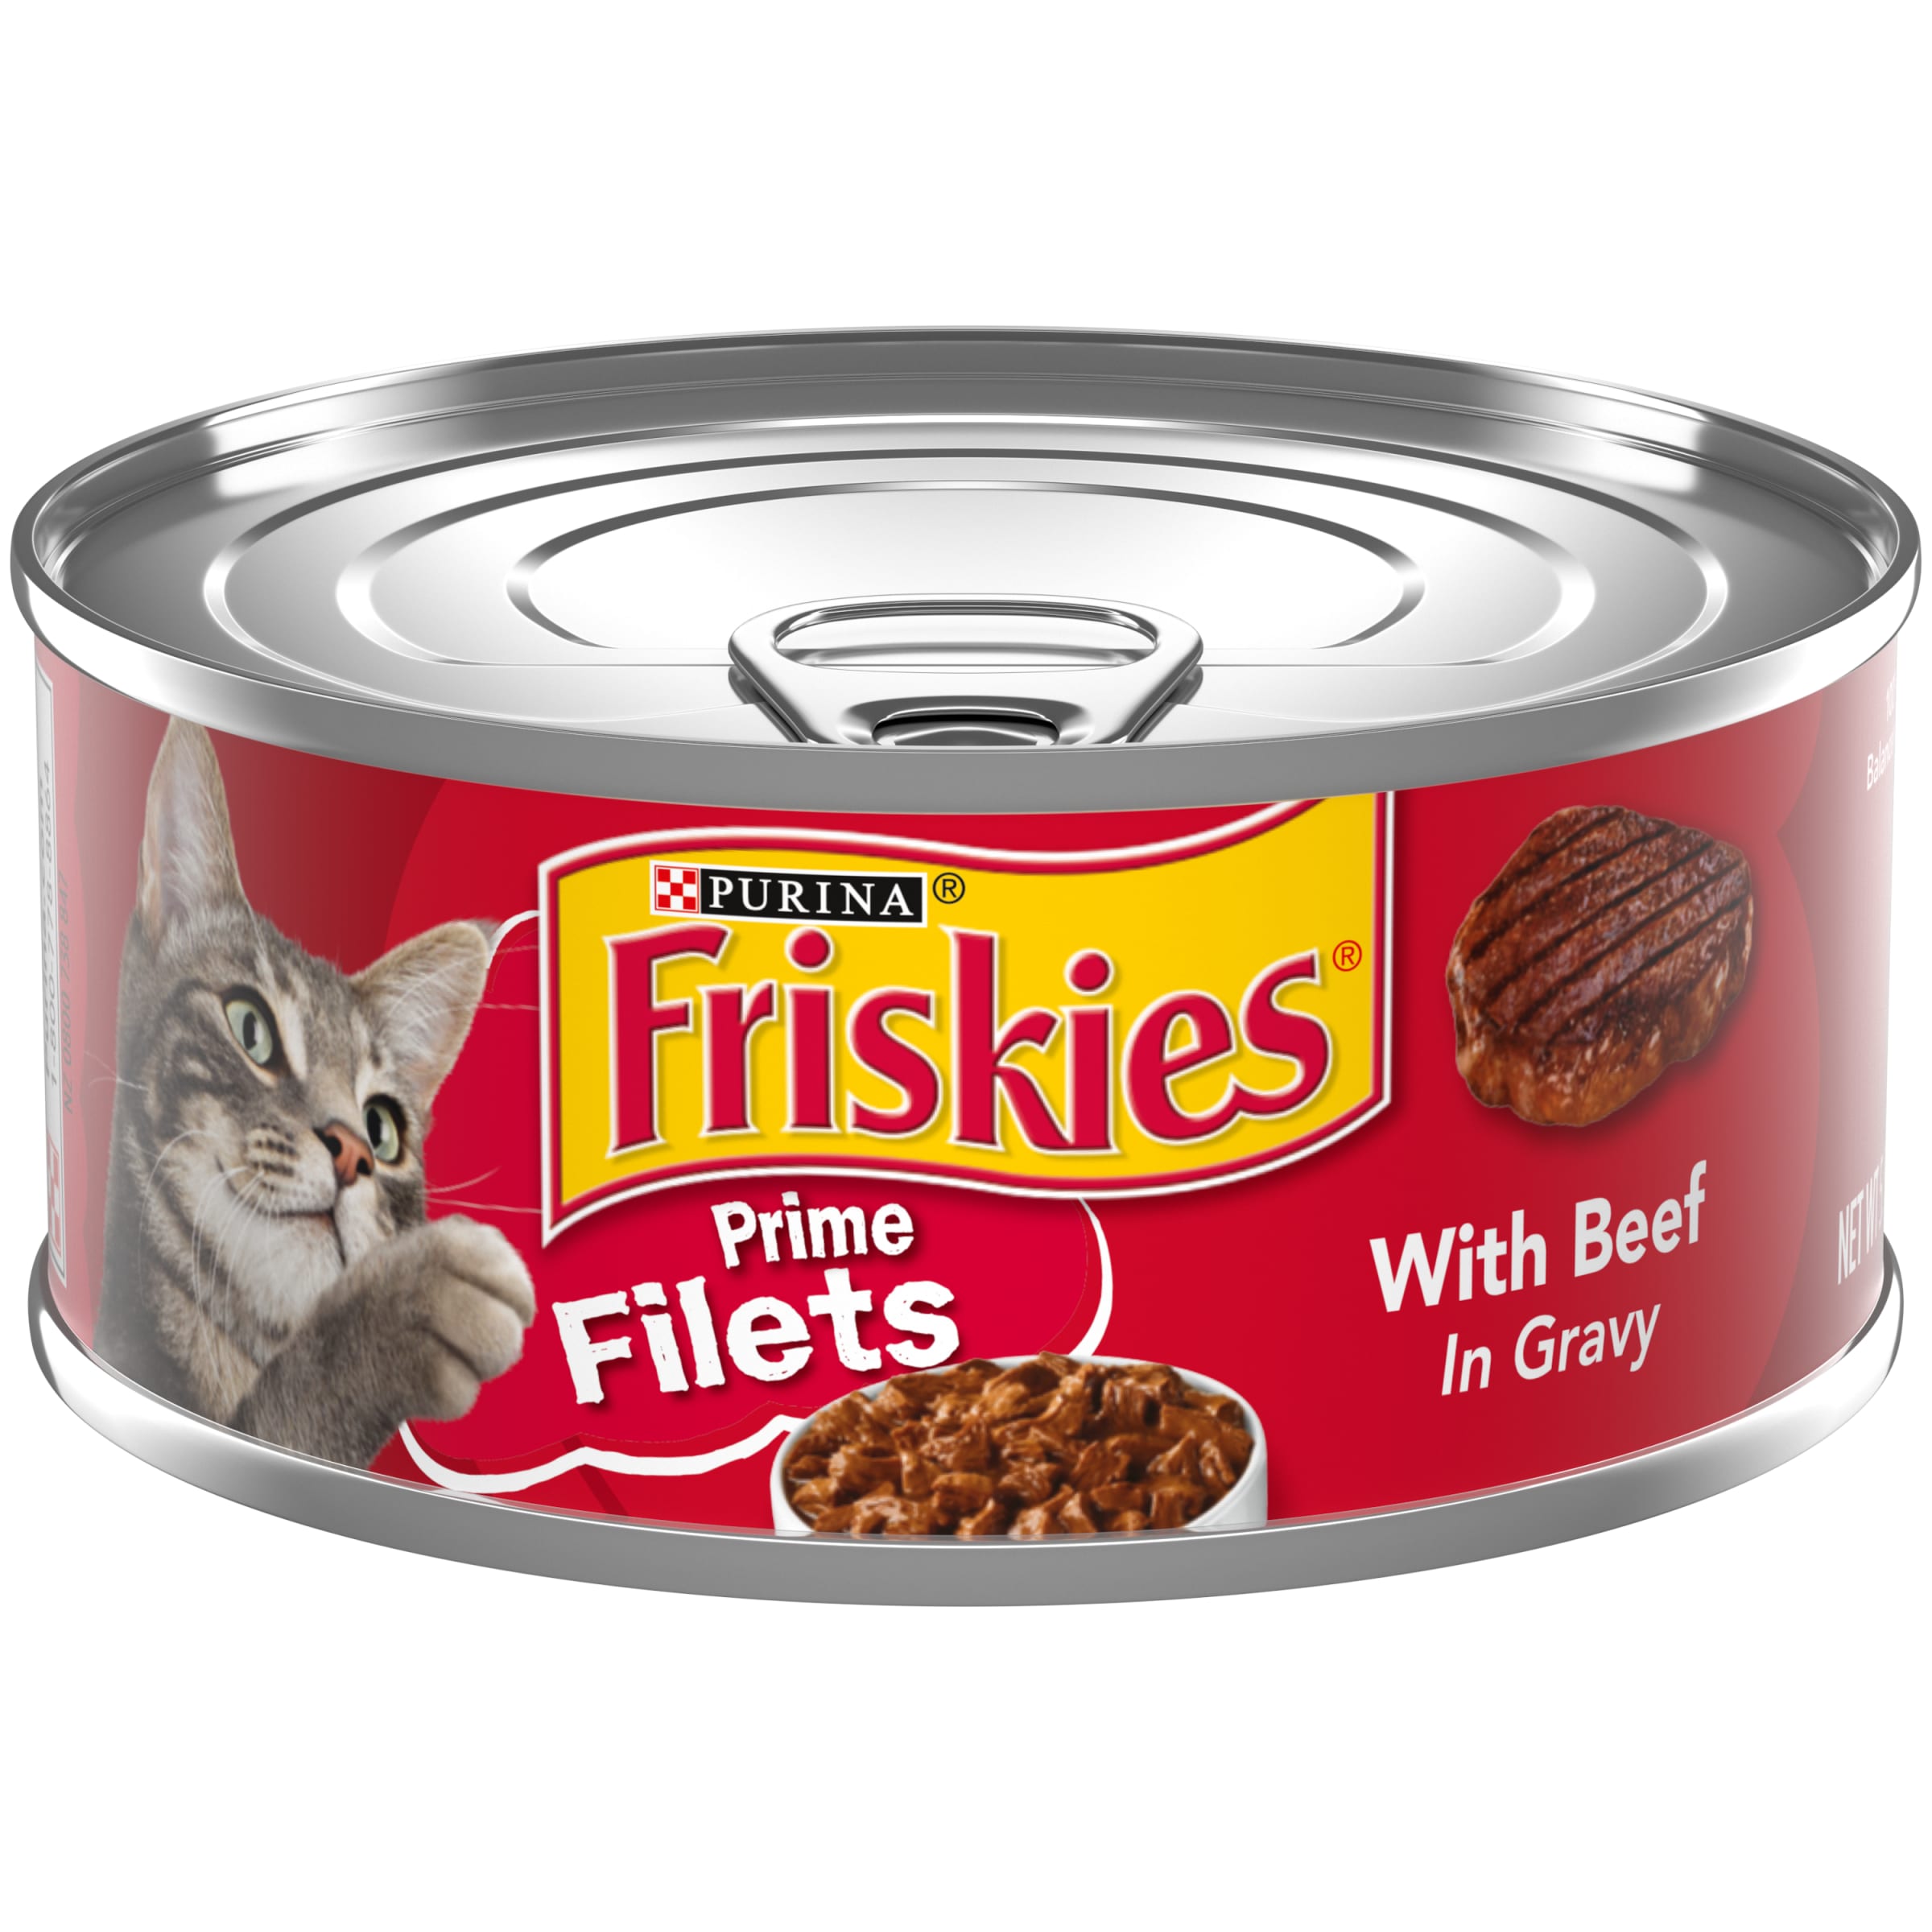 Purina Friskies Prime Filets Gravy Wet Cat Food for Adult Cats, Soft Beef, 5.5 oz Cans (24 Pack) - image 1 of 9